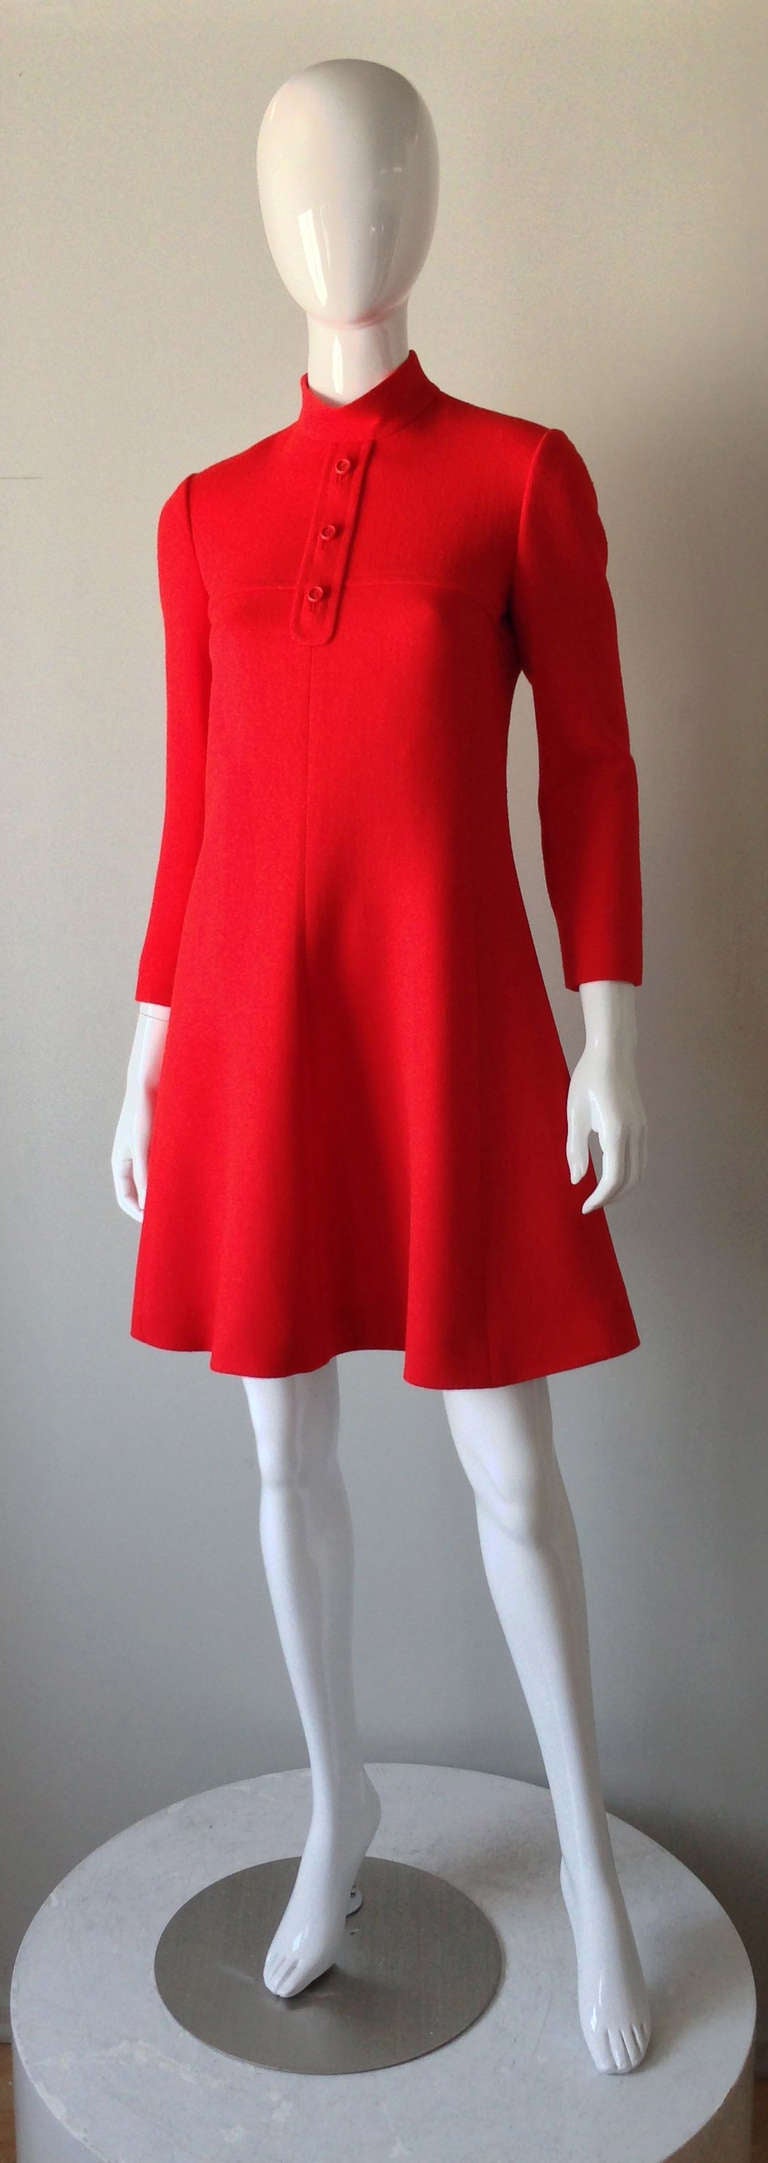 A fine vintage Christian Dior afternoon dress. Bright red wool crepe item features precision seams, faux button front, fully silk lined and zips up back. Rare item for the Japanese market. Pristine appears unworn.